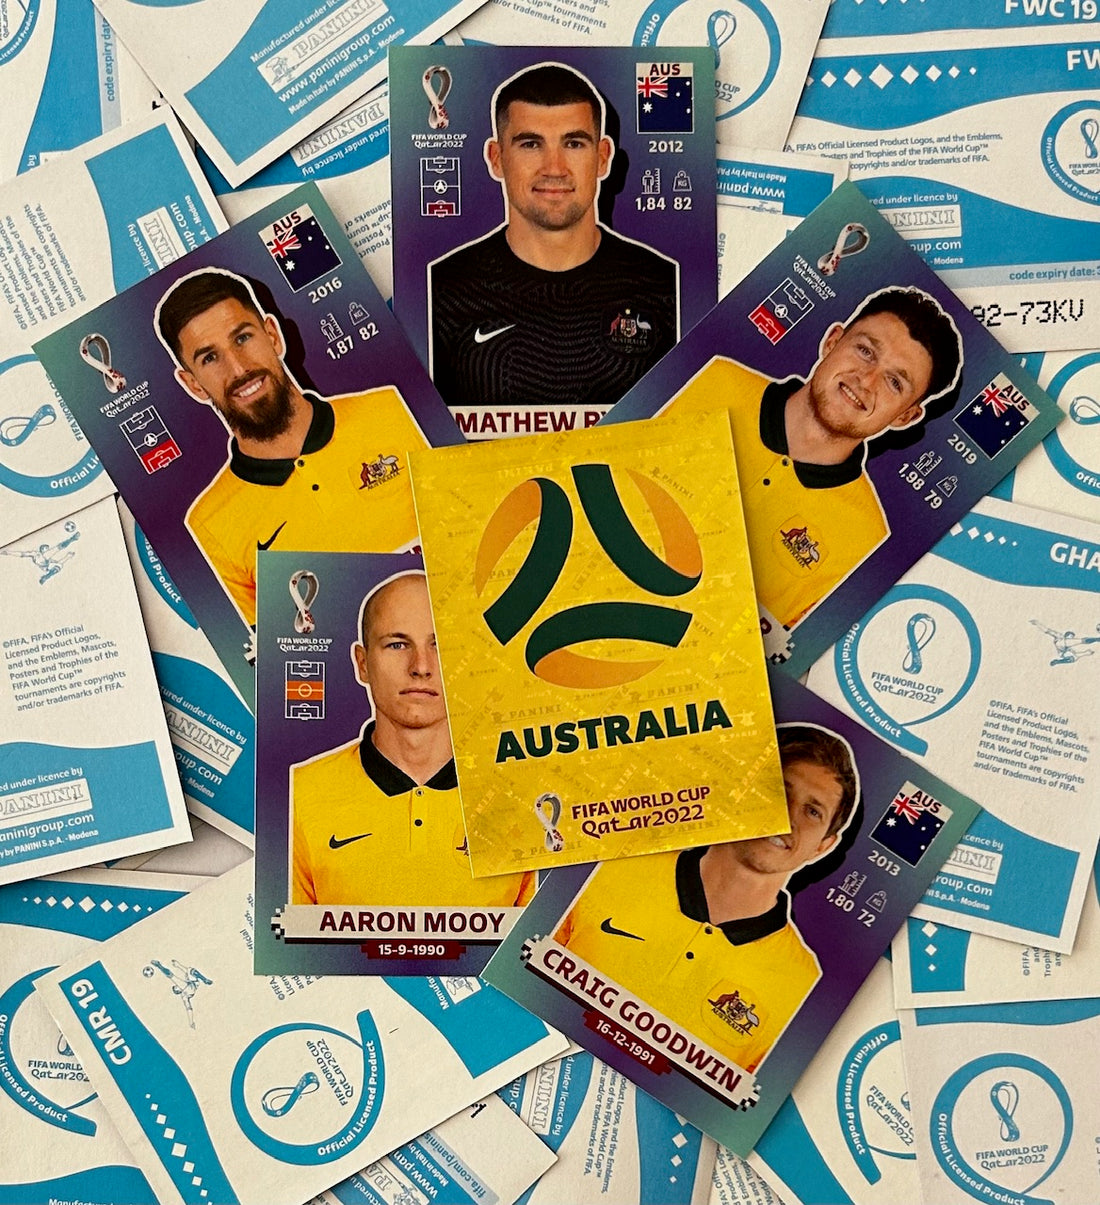 Socceroos Panini World Cup 2022 releases including Australian heroes such as Mathew Ryan, Aaron Mooy & Craig Goodwin